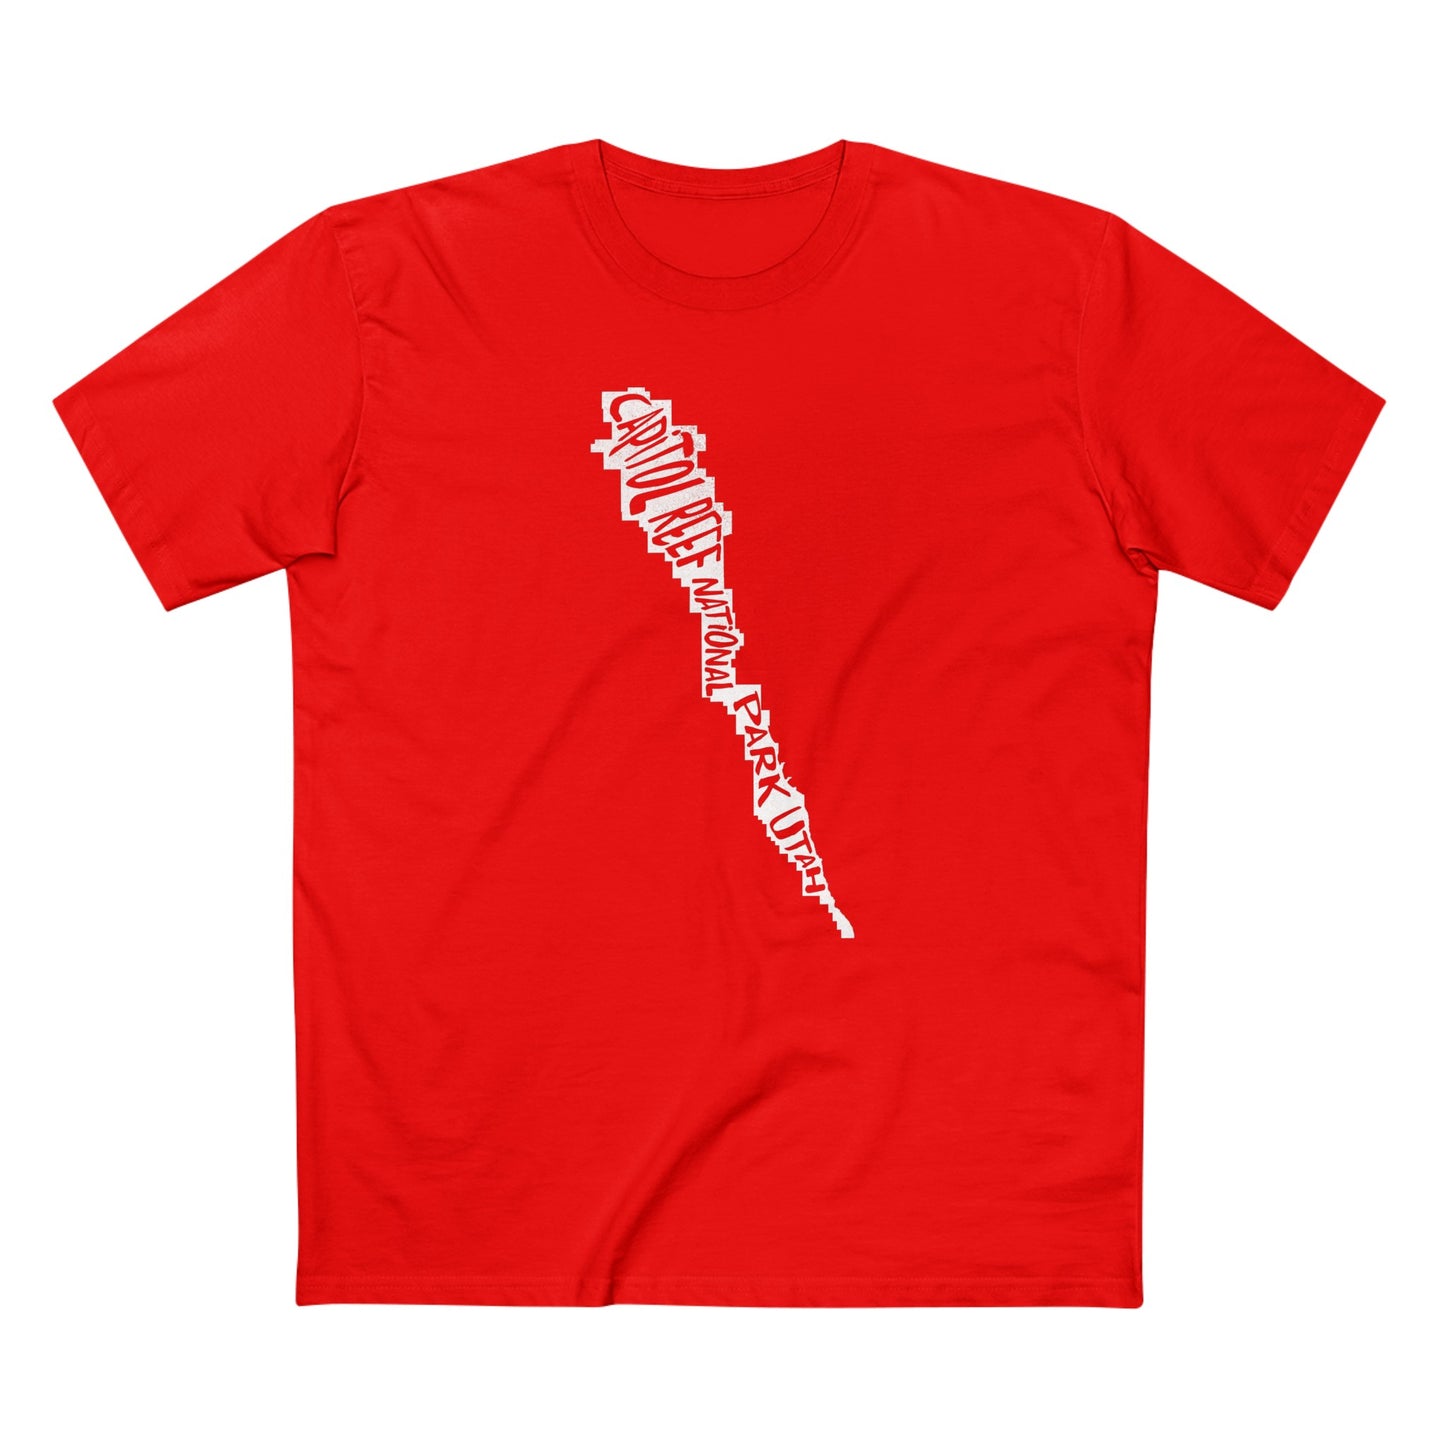 Capitol Reef National Park T-Shirt - Map